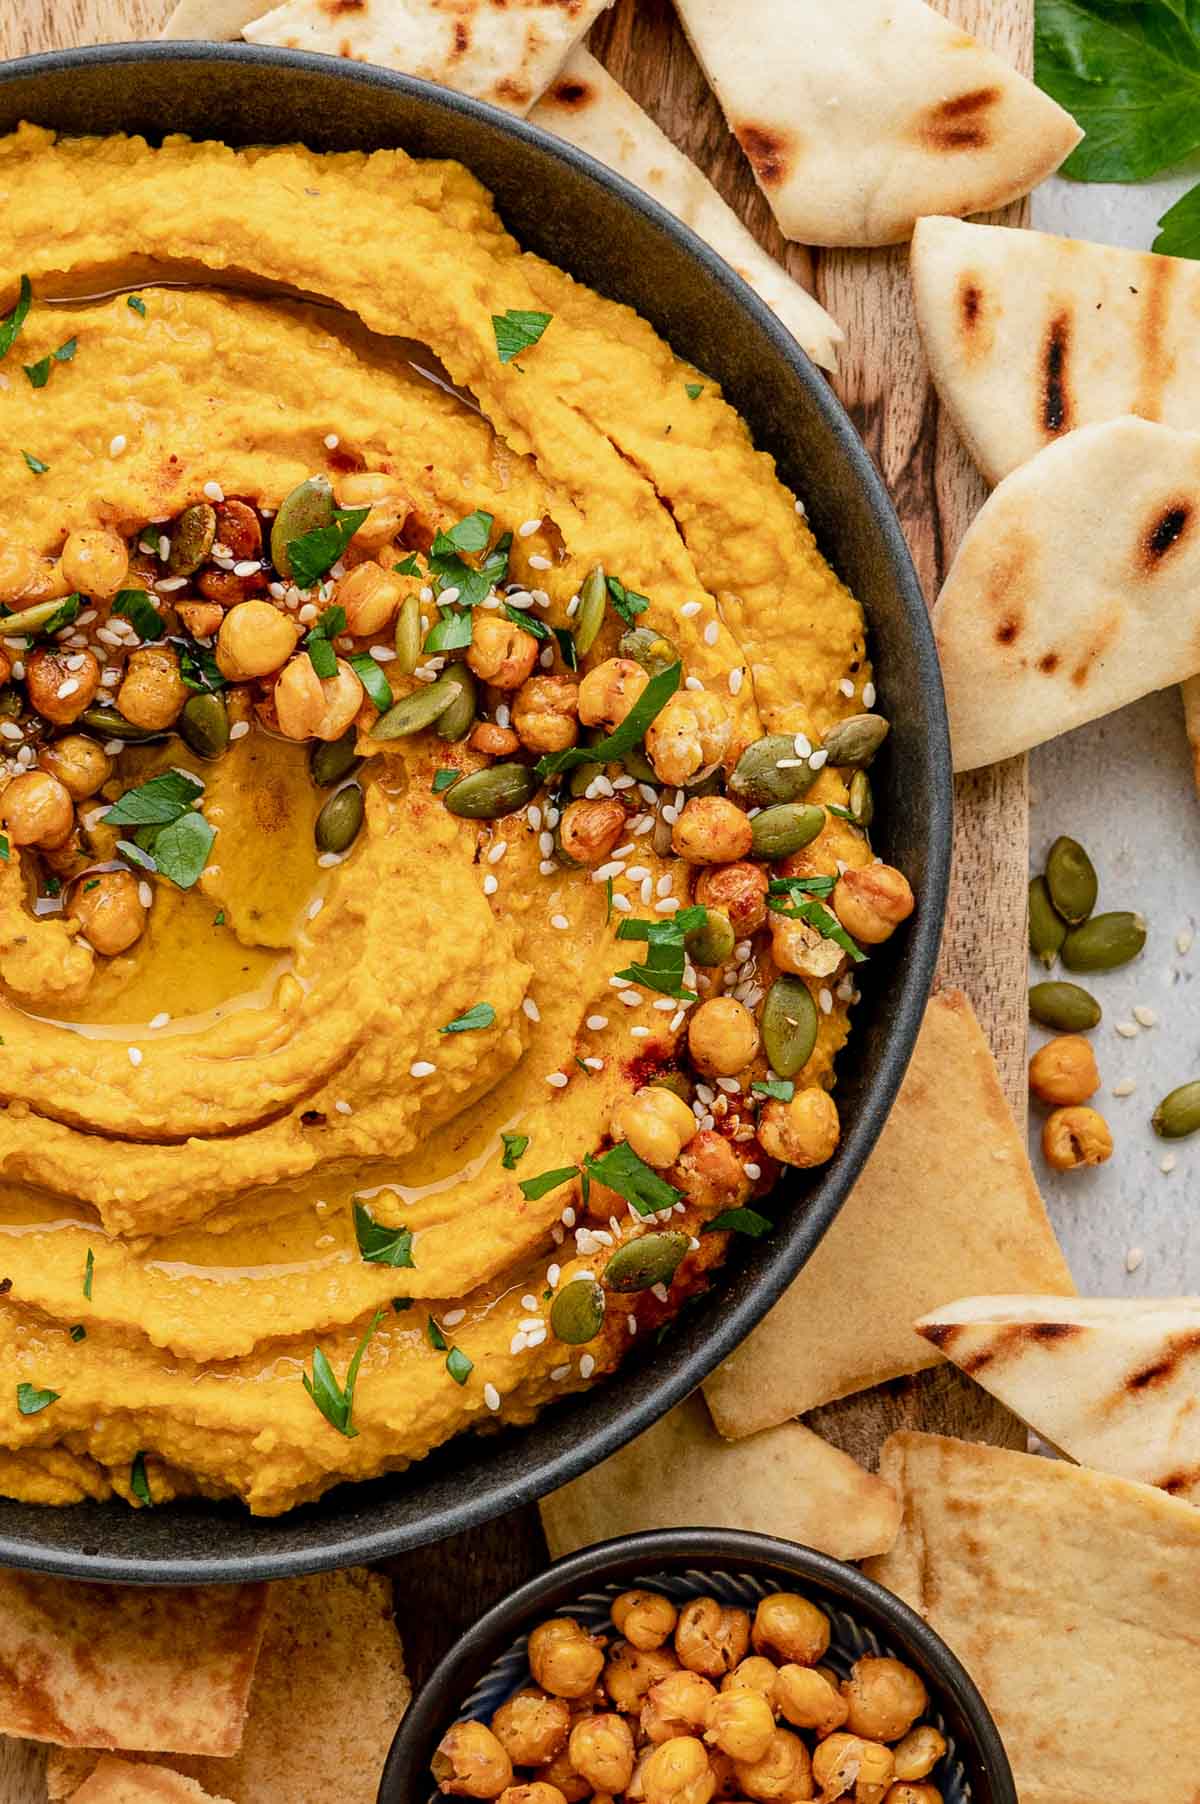 A bowl of pumpkin hummus with naan and pita and chickpeas.